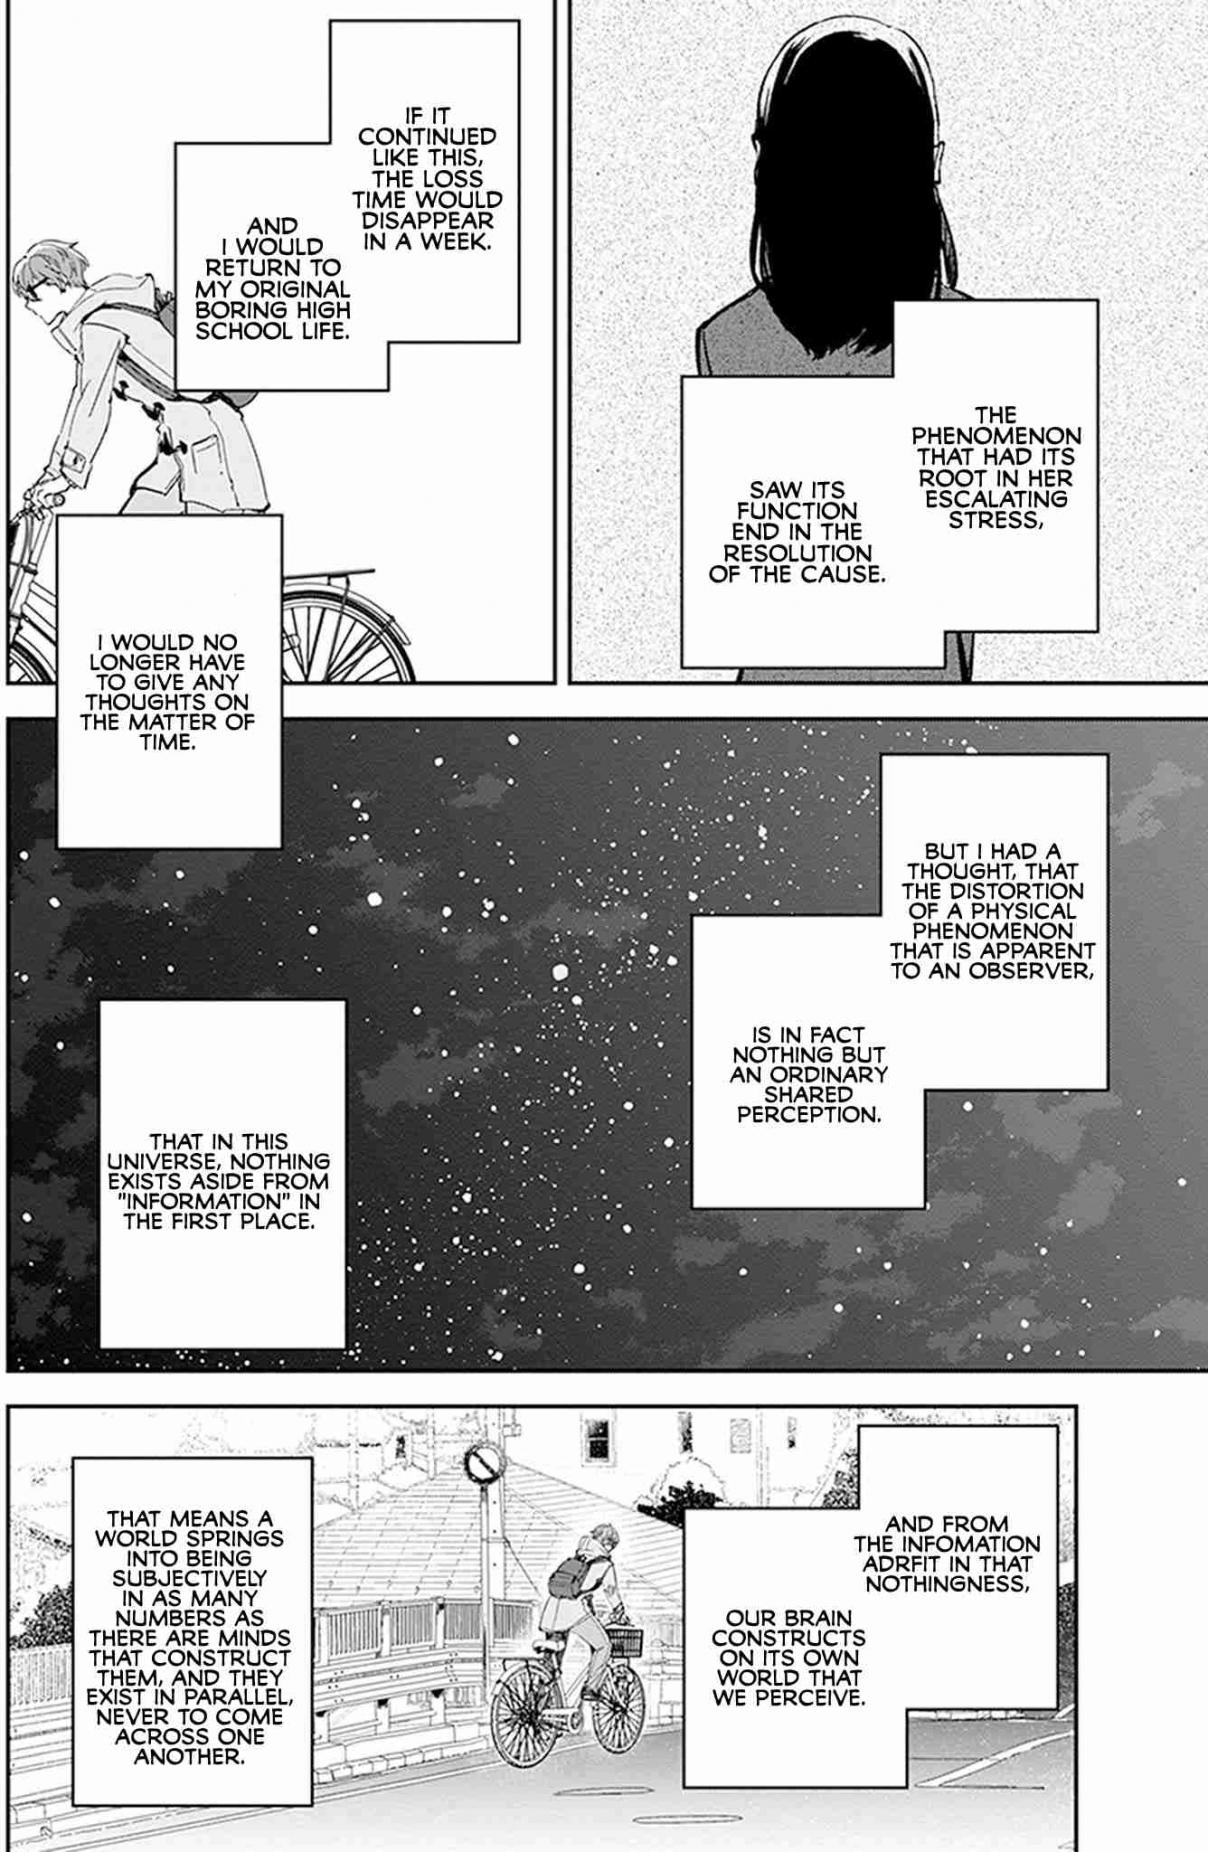 Hatsukoi Losstime Vol. 2 Ch. 8 I Hear the Ticking of Time, Part 2